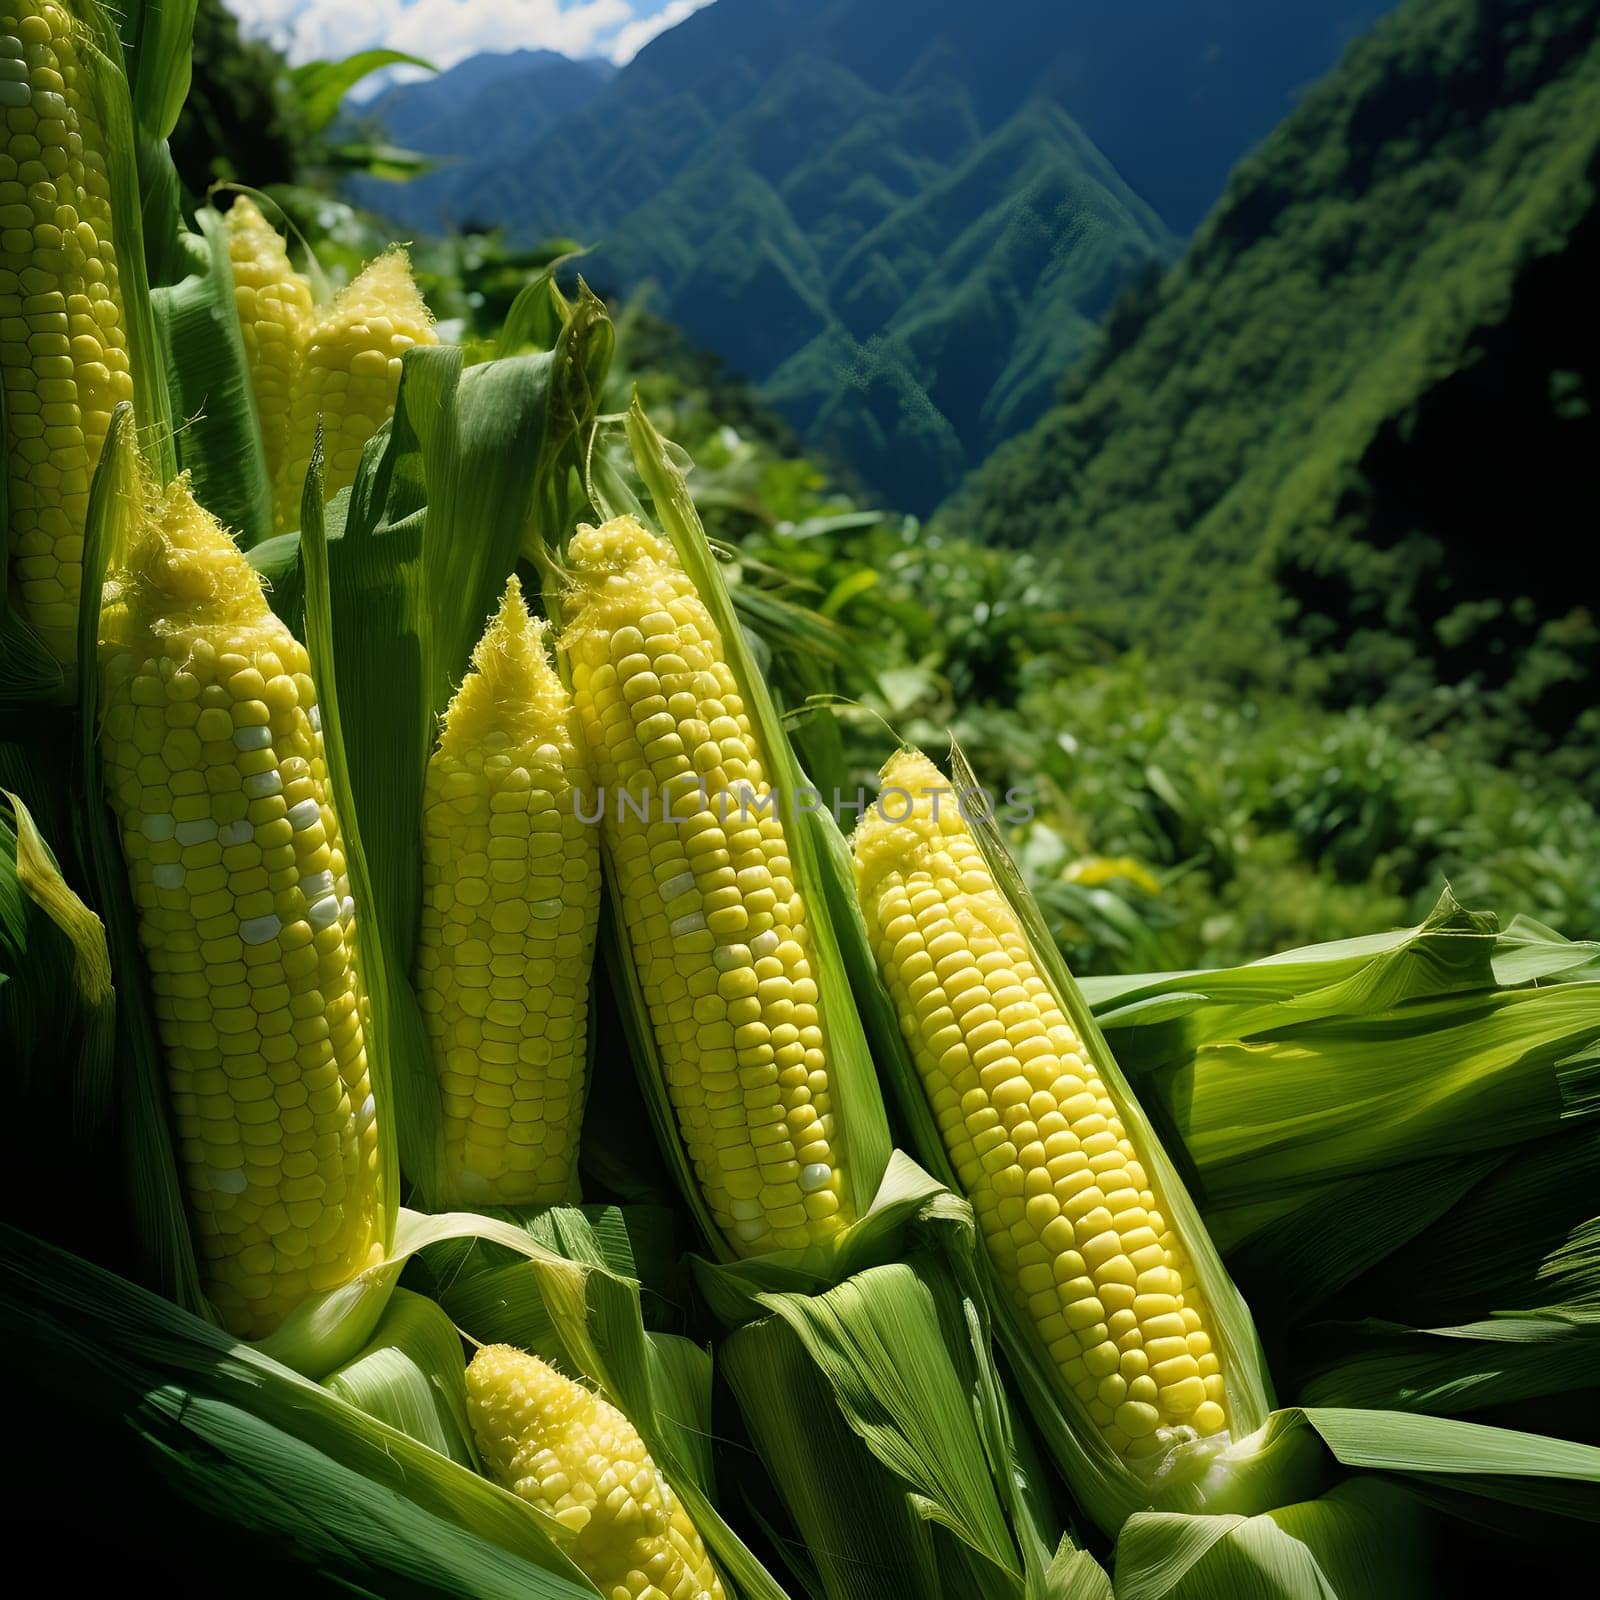 Yellow corn cobs leaf on bushes background mountainside green. Corn as a dish of thanksgiving for the harvest. An atmosphere of joy and celebration.